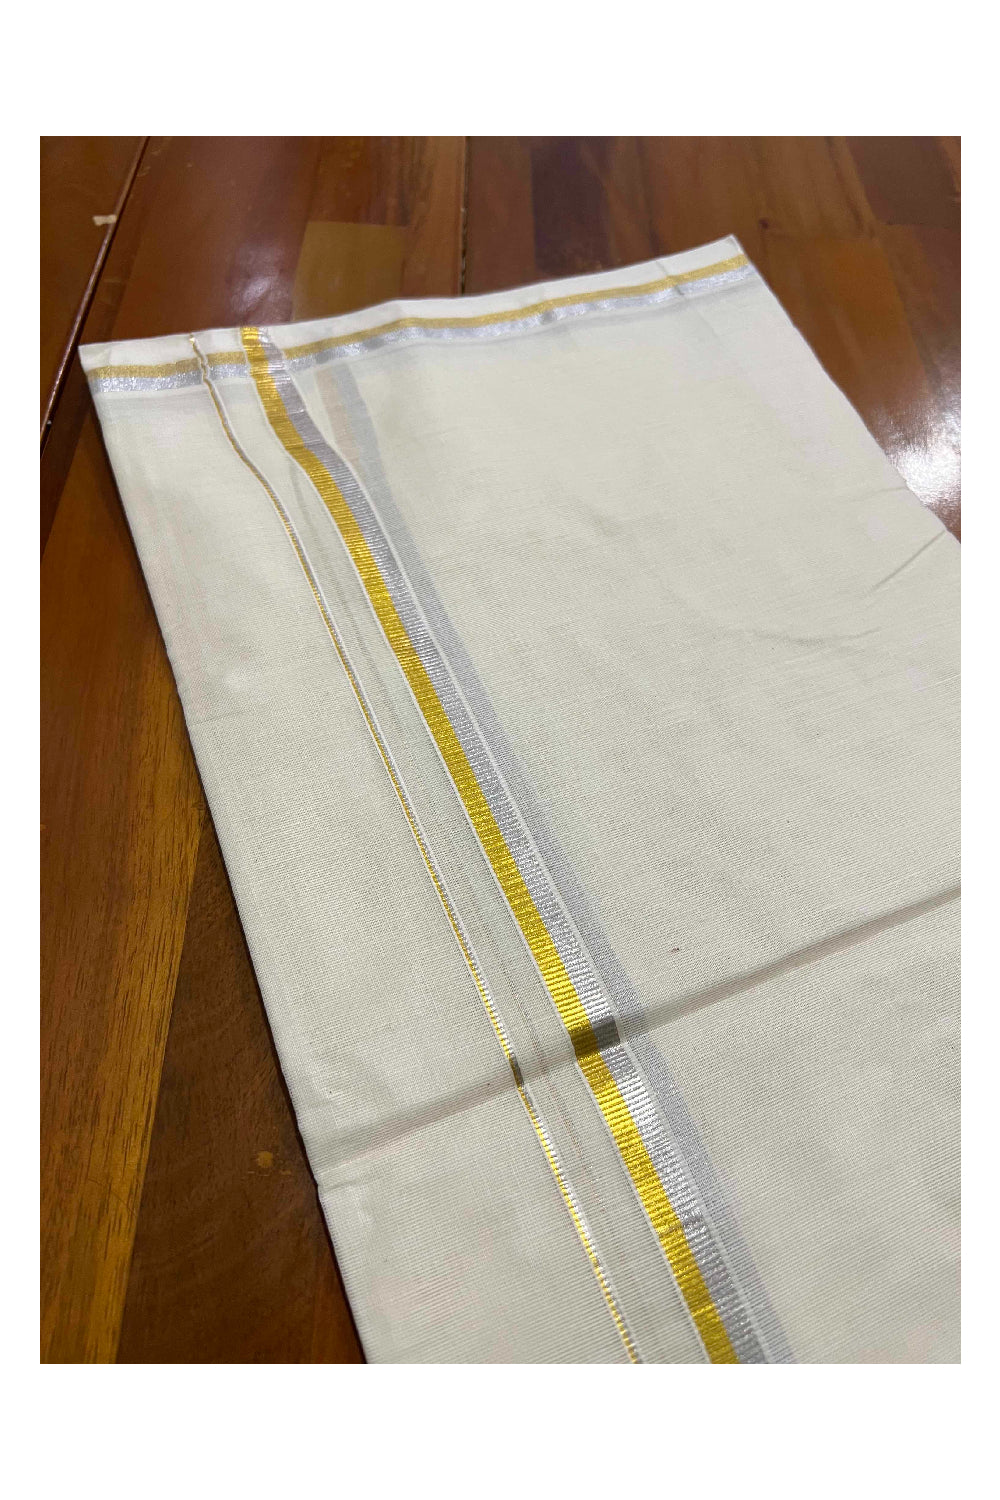 Off White Kerala Double Mundu with Silver and Golden Kasavu Border 0.5 inches (South Indian Dhoti)